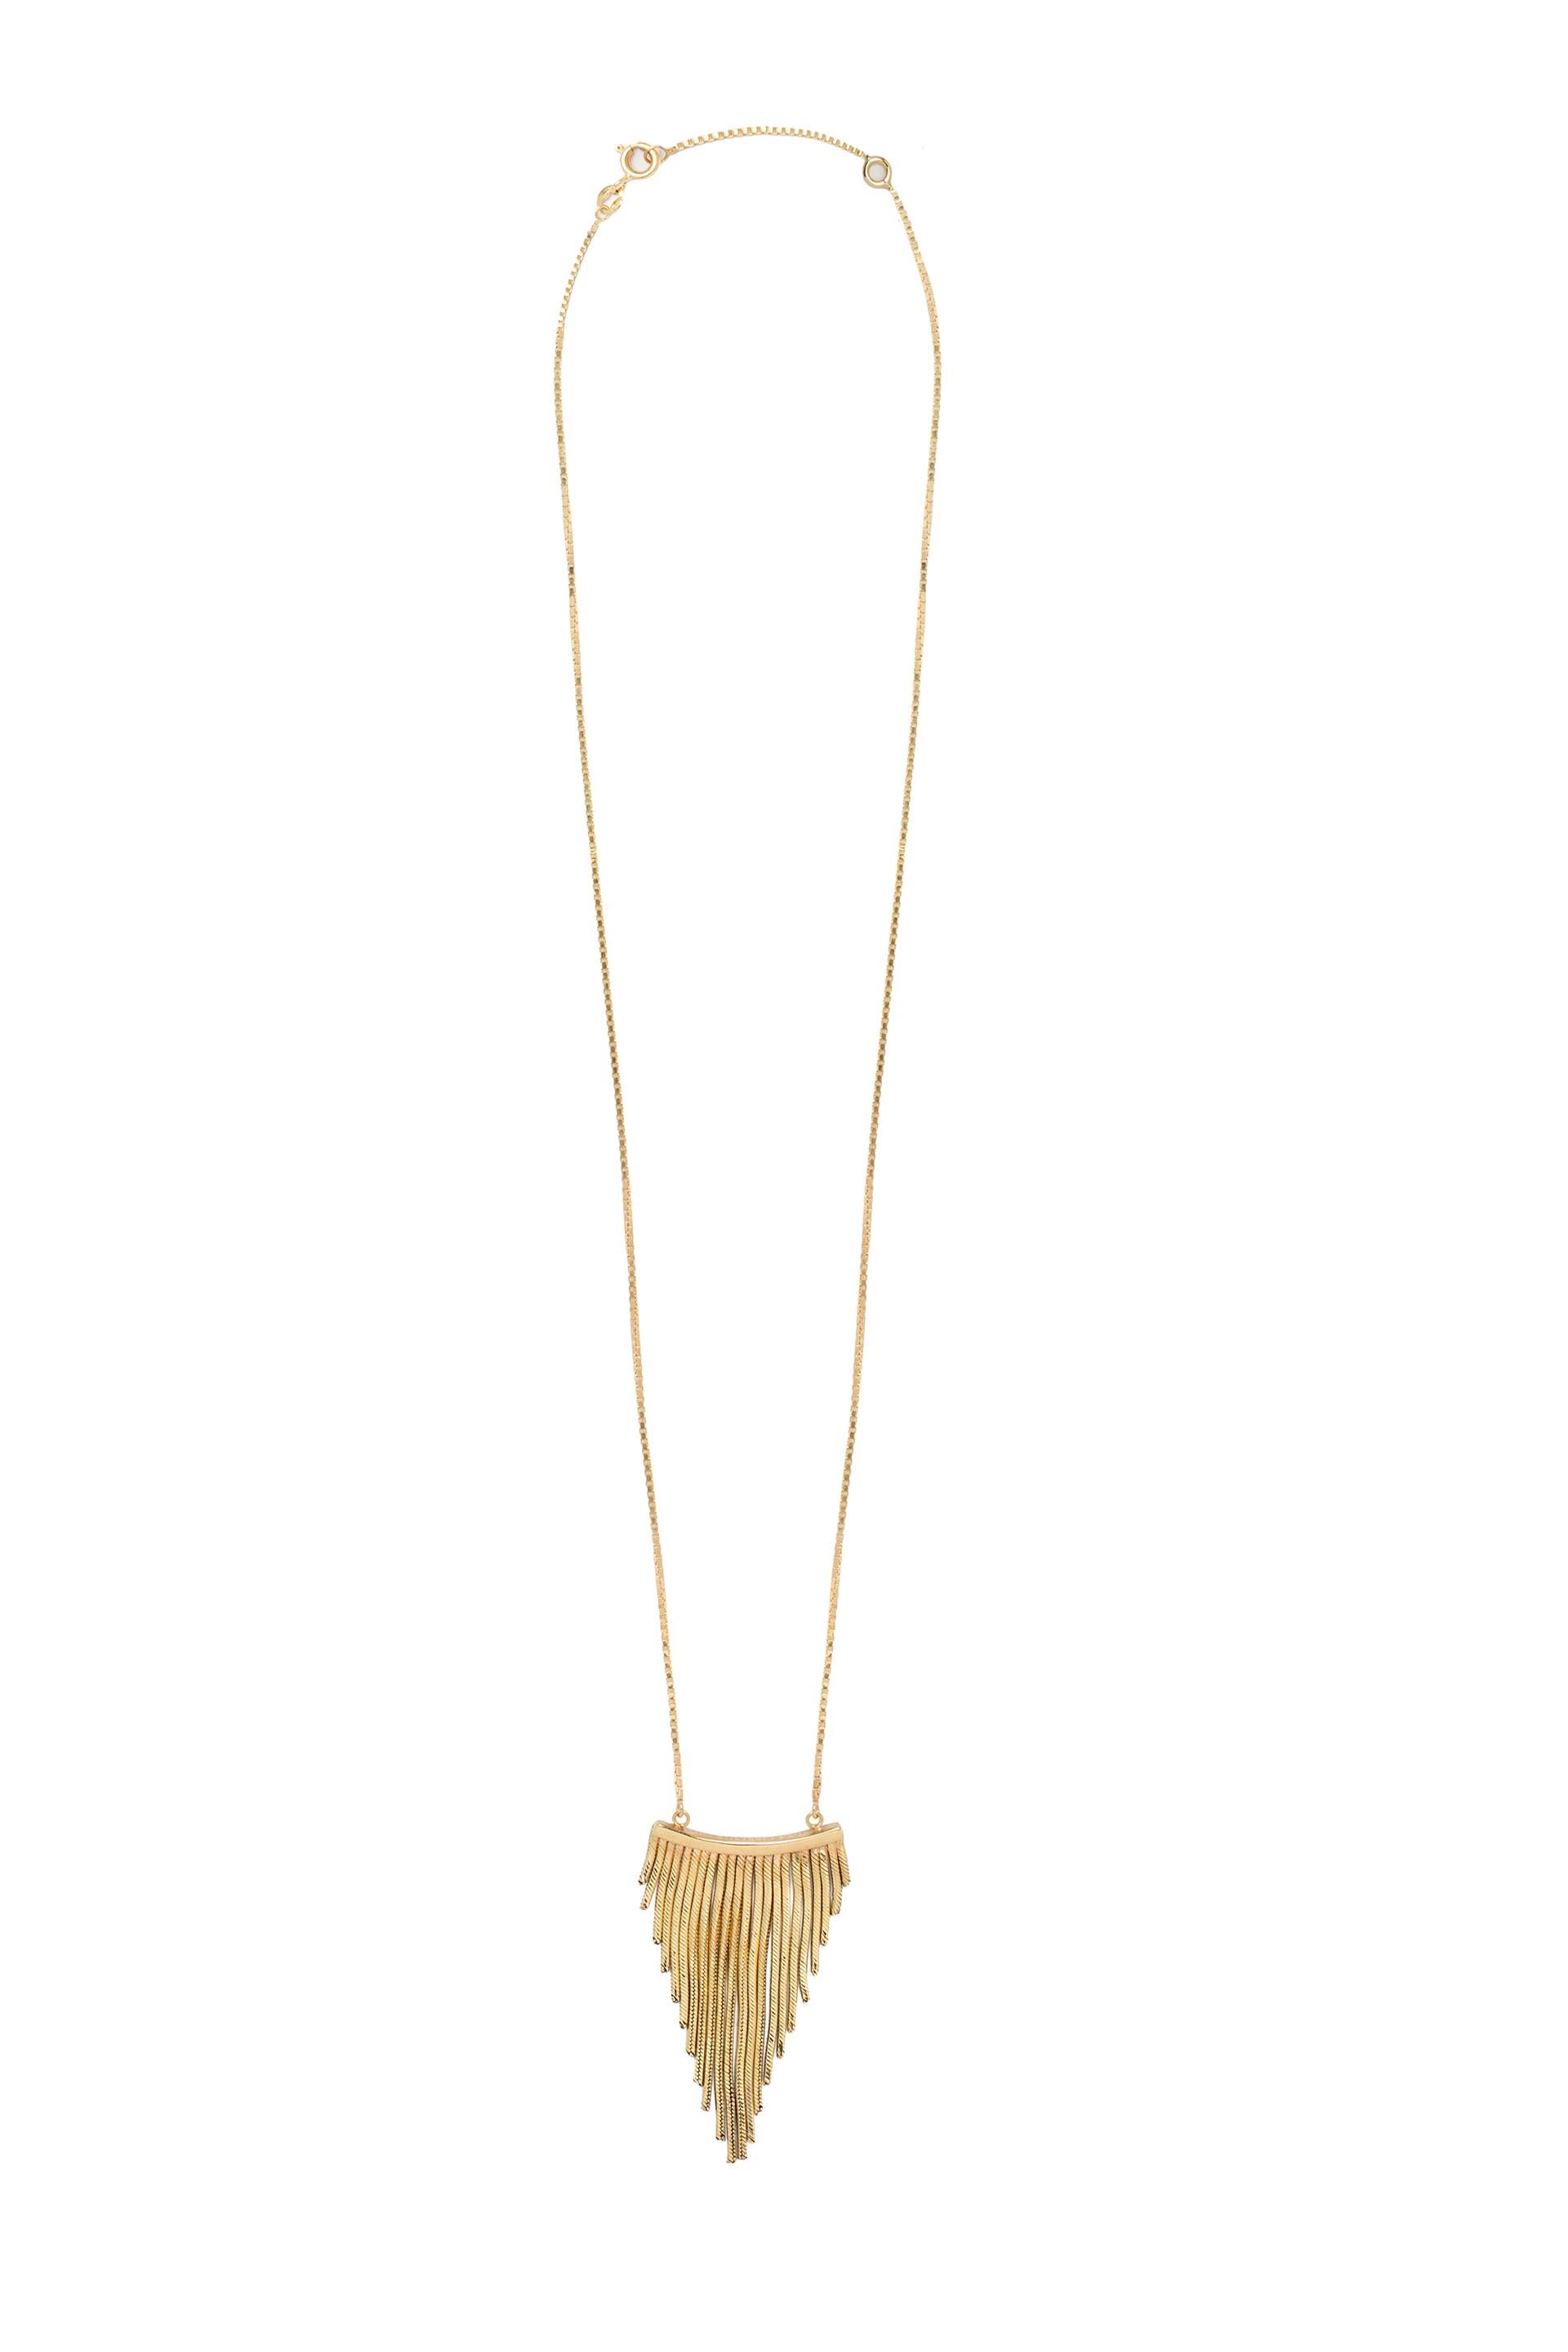 The necklace is crafted in 18 Karat gold with a custom made chain. Centred by a swinging central of multi thread wires, this piece is intended to be the new classic with an edgy style. The pendant necklace features a spring ring clasp and is